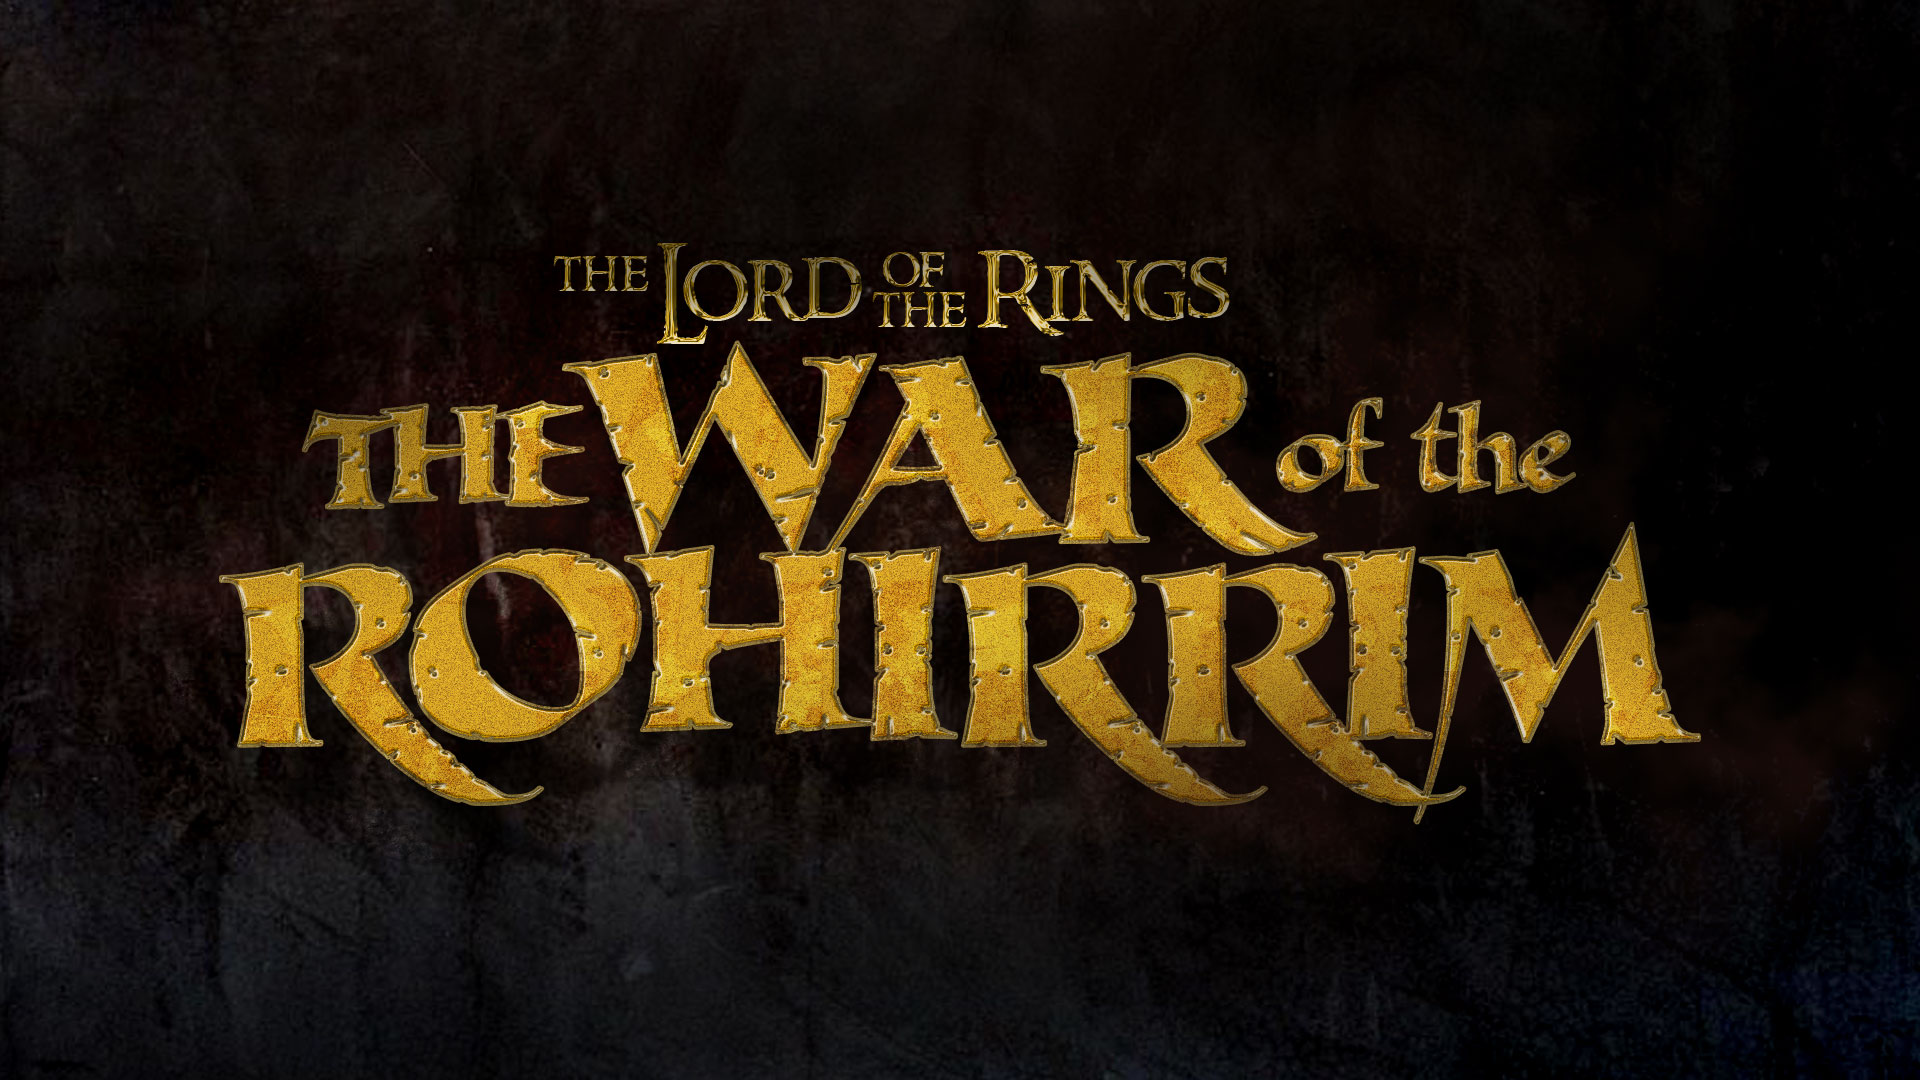 Everything You Need To Know About 'The Lord of the Rings: Return to Moria'  Game & Trailer - Fellowship of Fans